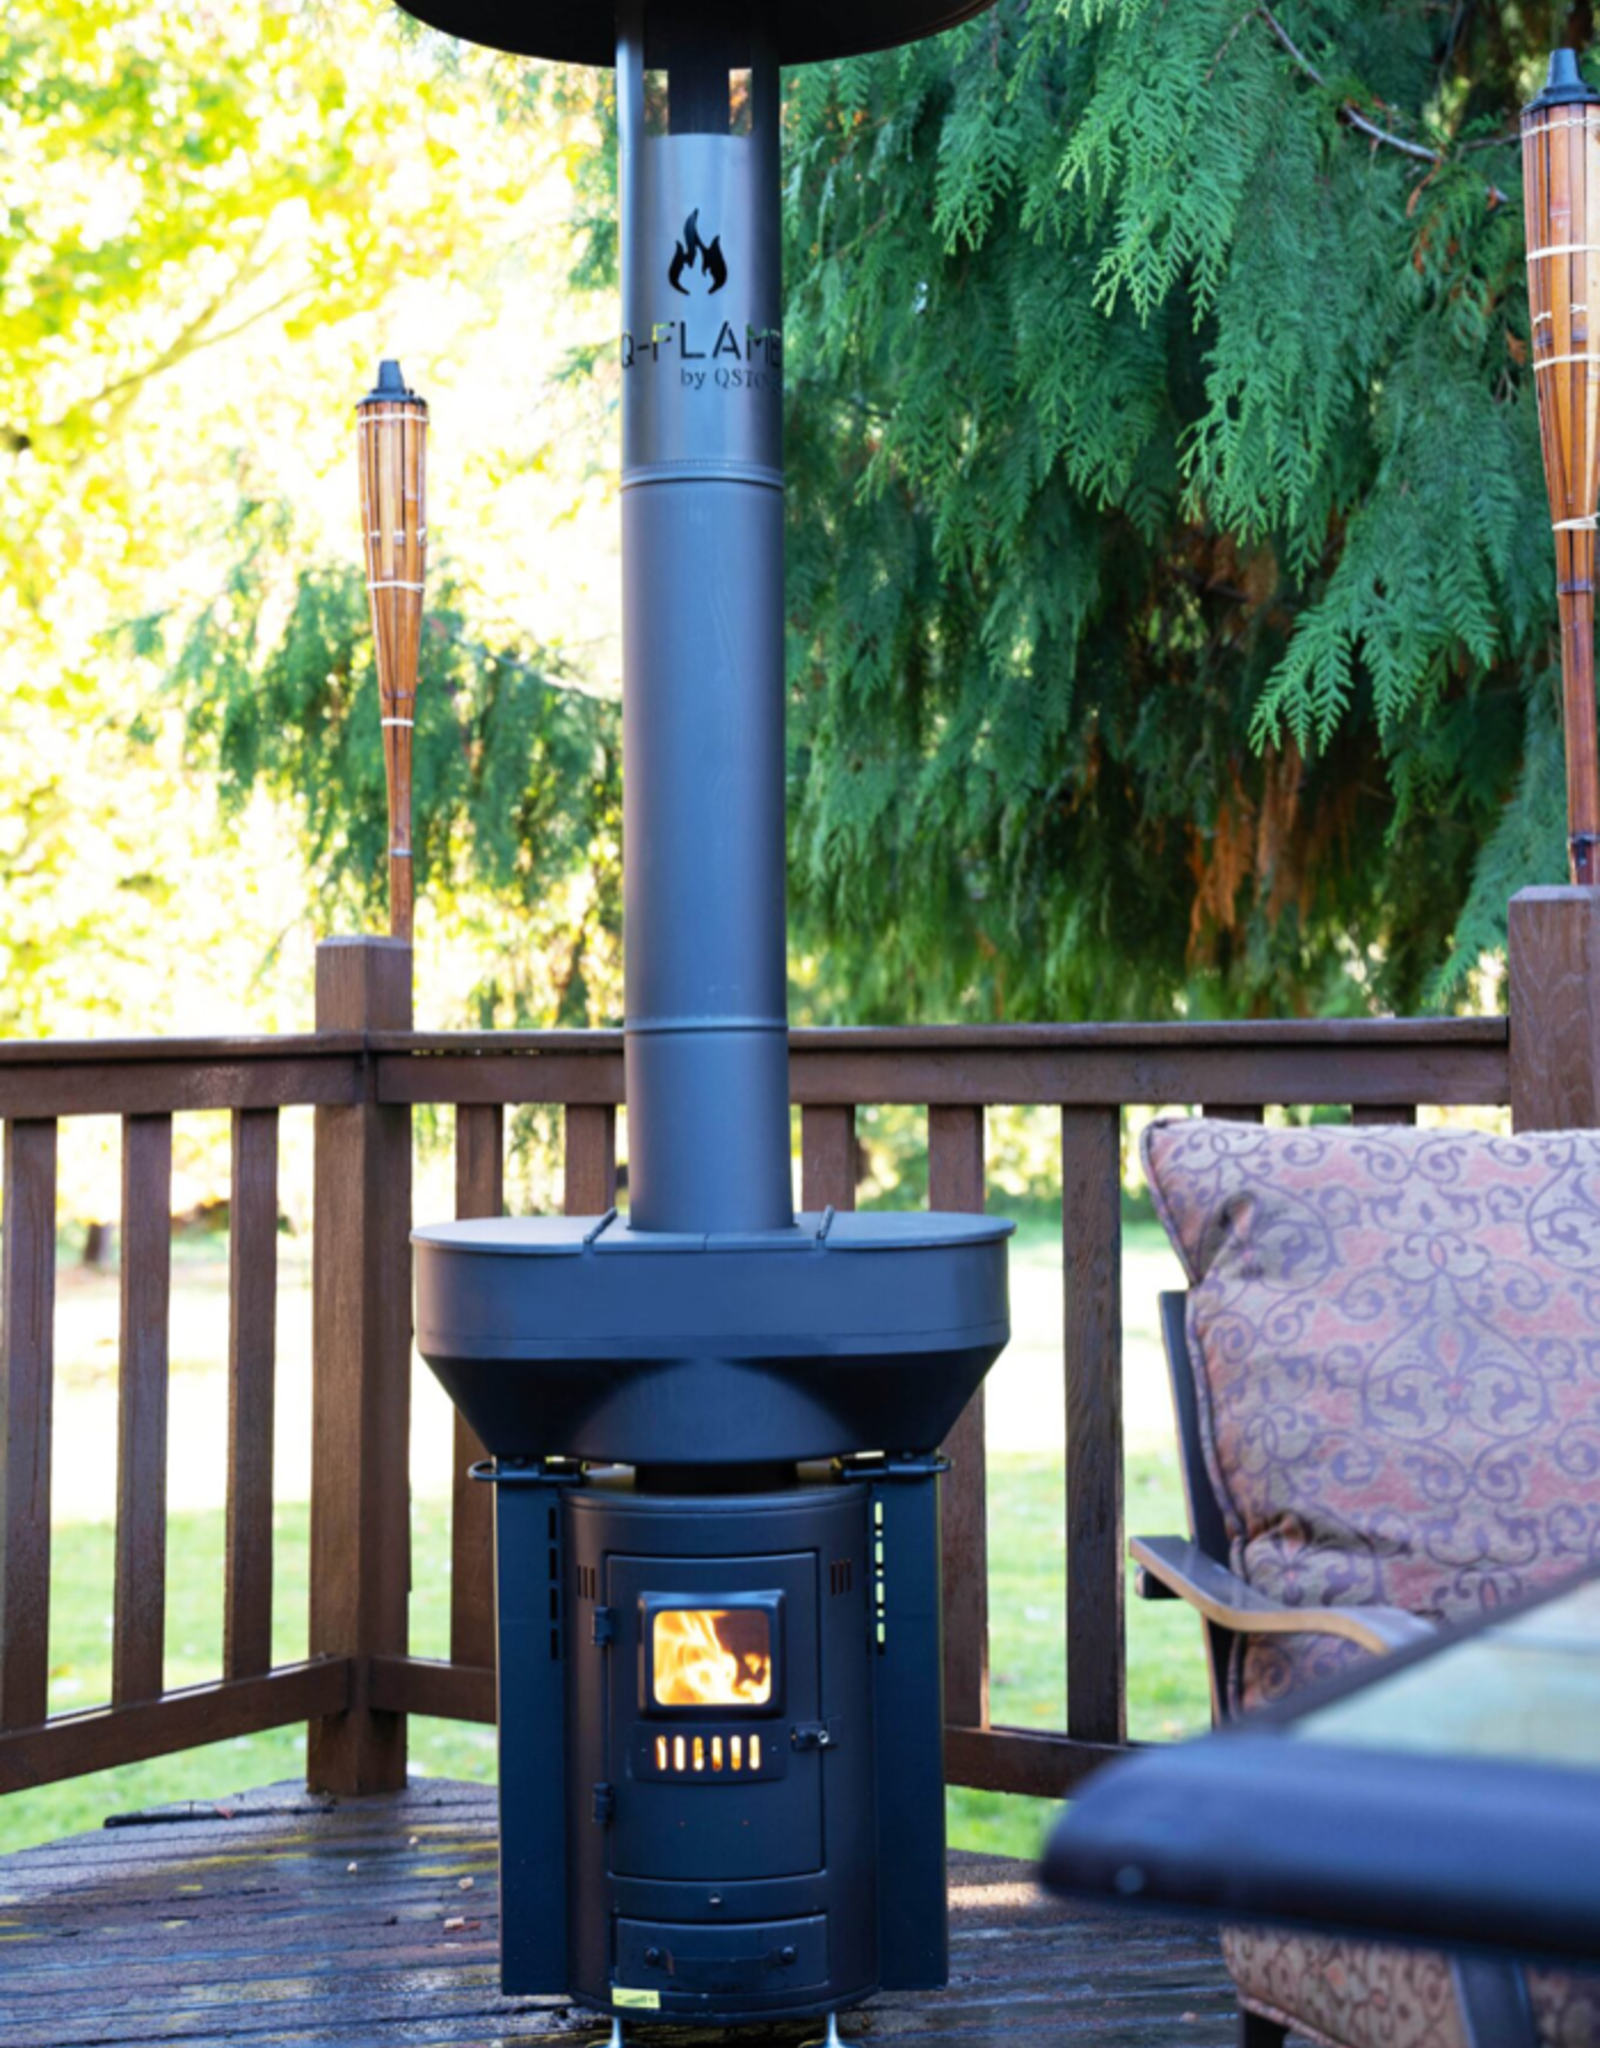 QSTOVES Q-FLAME PATIO HEATER